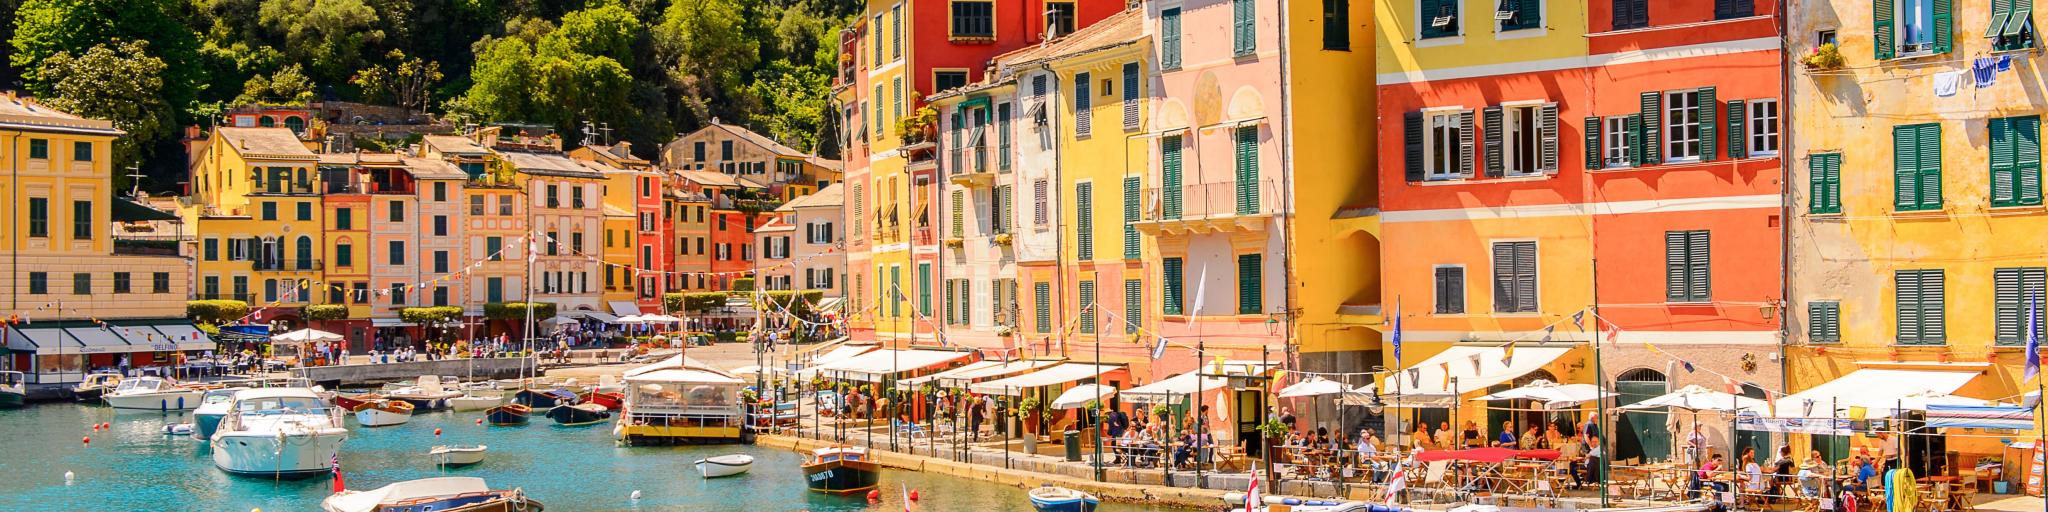 Boats in the turquoise blue water of the harbour in Portofino, Italy, with colourful townhouses in the background